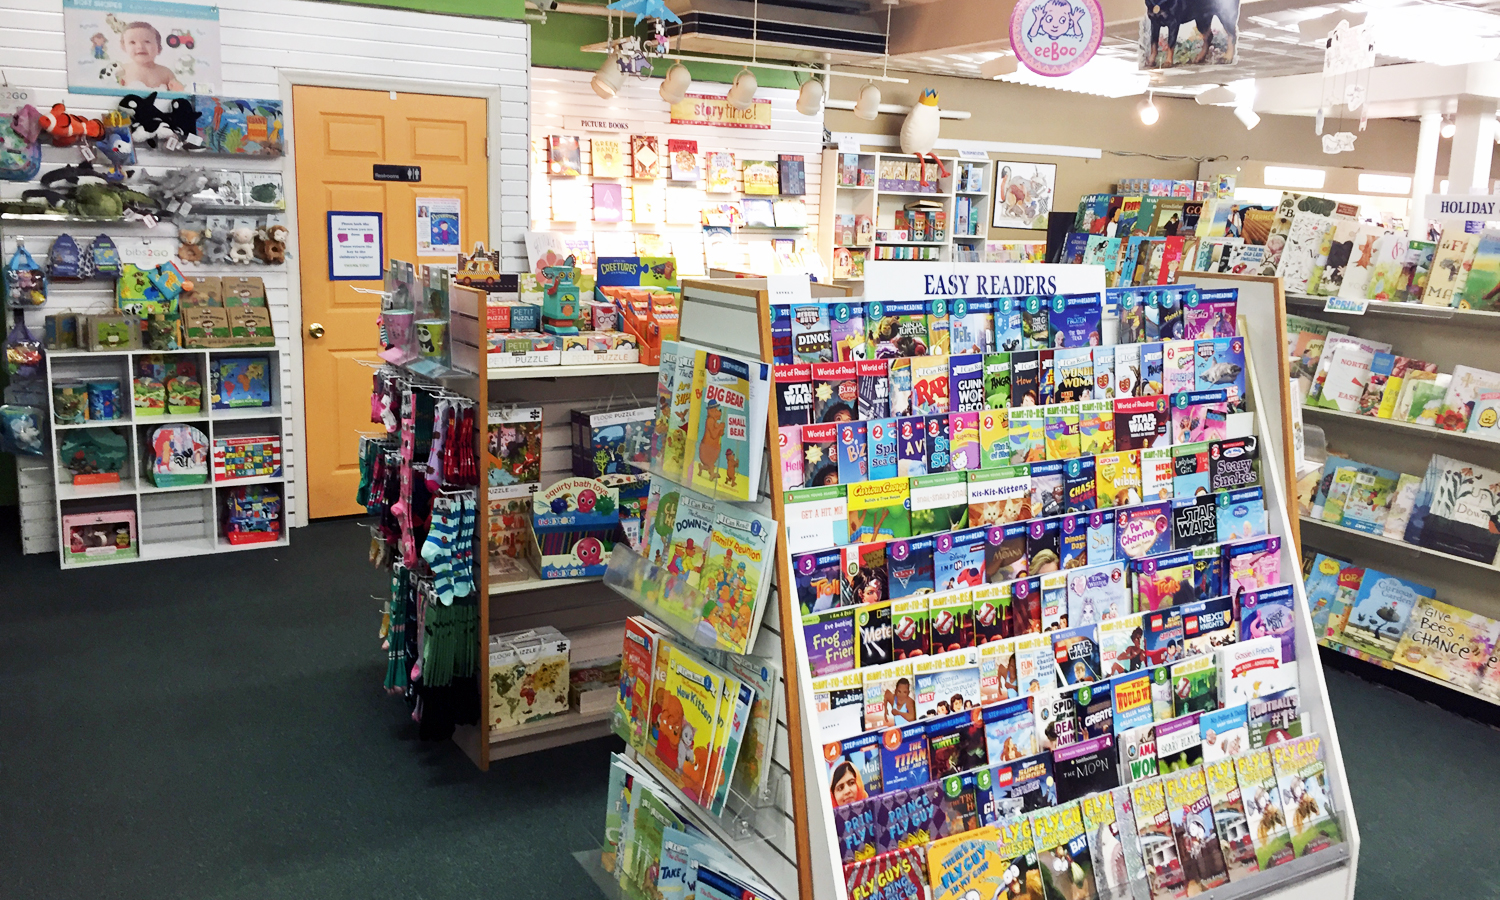 The kids section at this store is huge - its actually in multiple rooms!